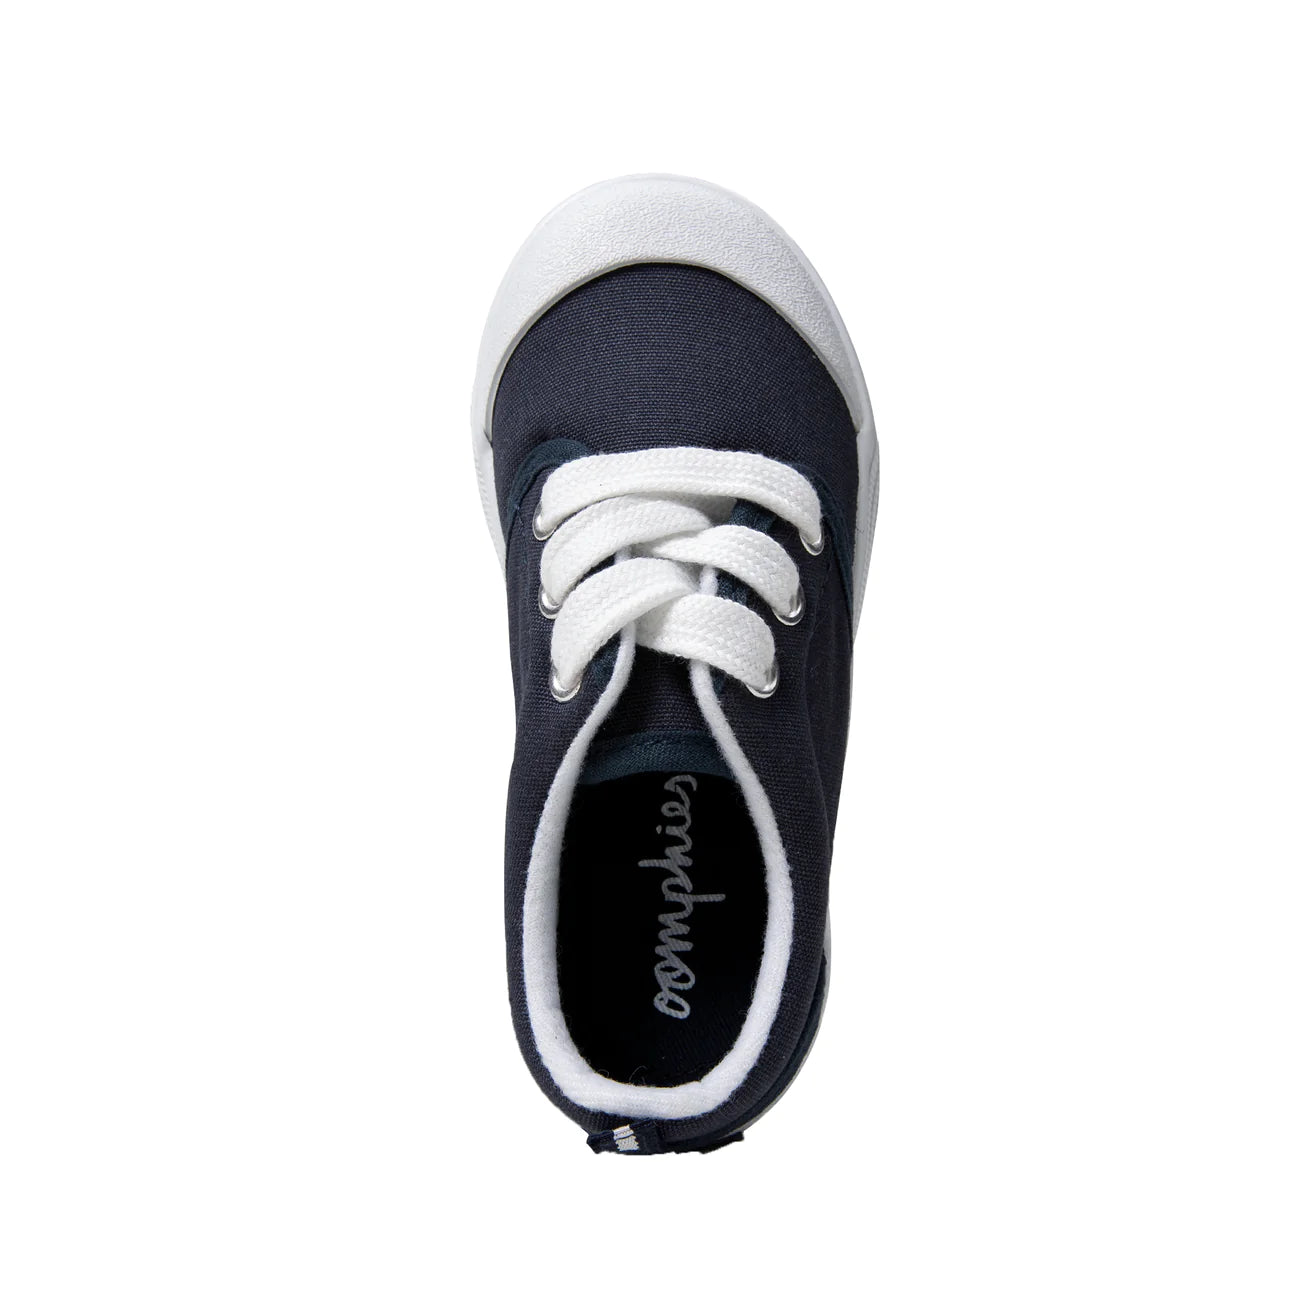 Shelby Navy Tennis Shoes